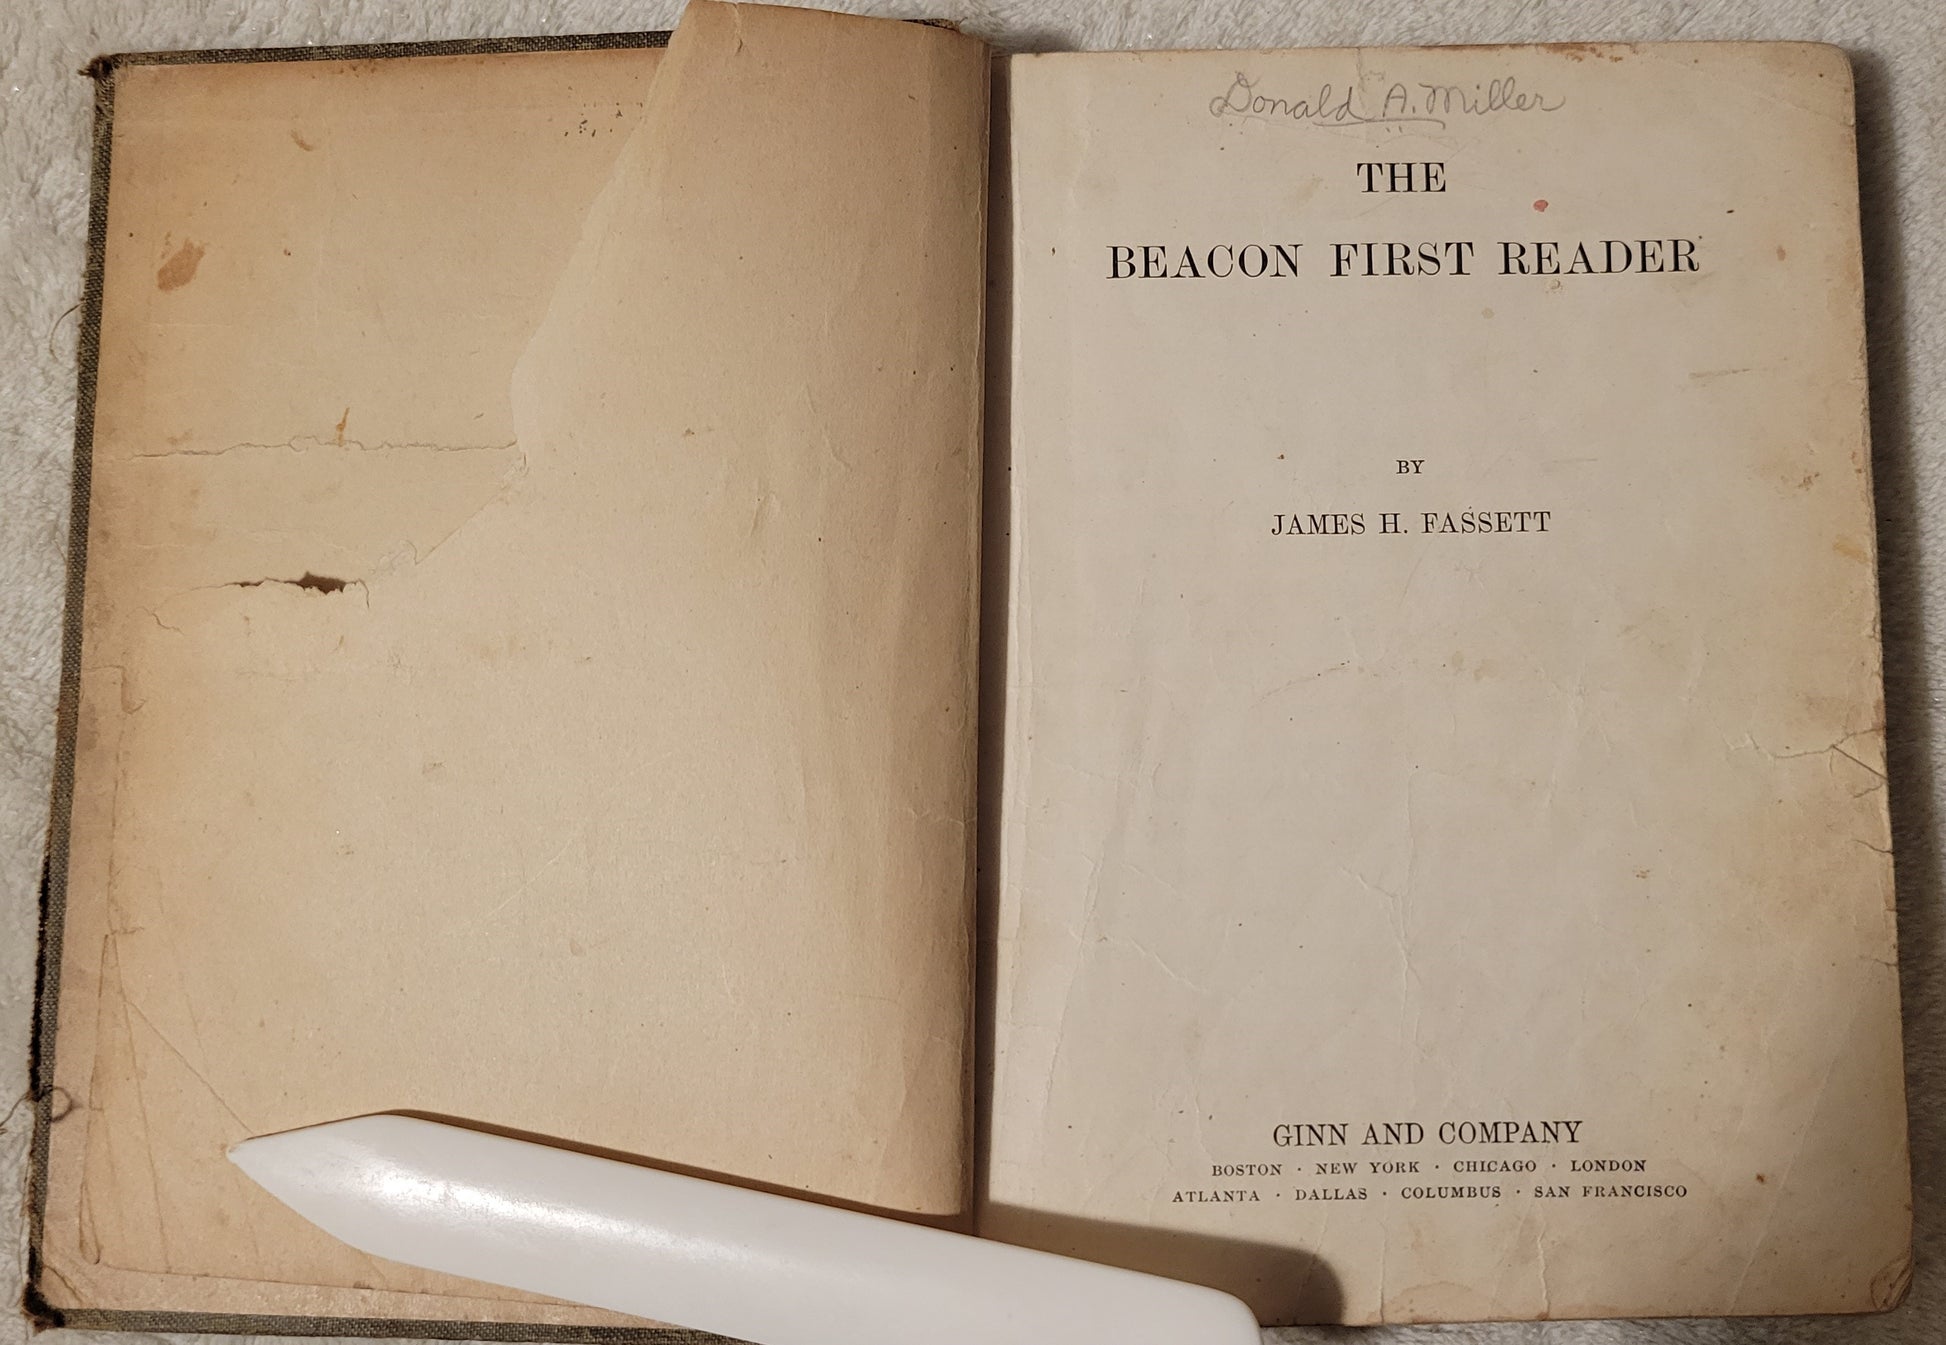 Antique book for sale "The Beacon First Reader" by James H. Fassett, Ginn and Company, 1913.  A child's schoolbook. Title page.